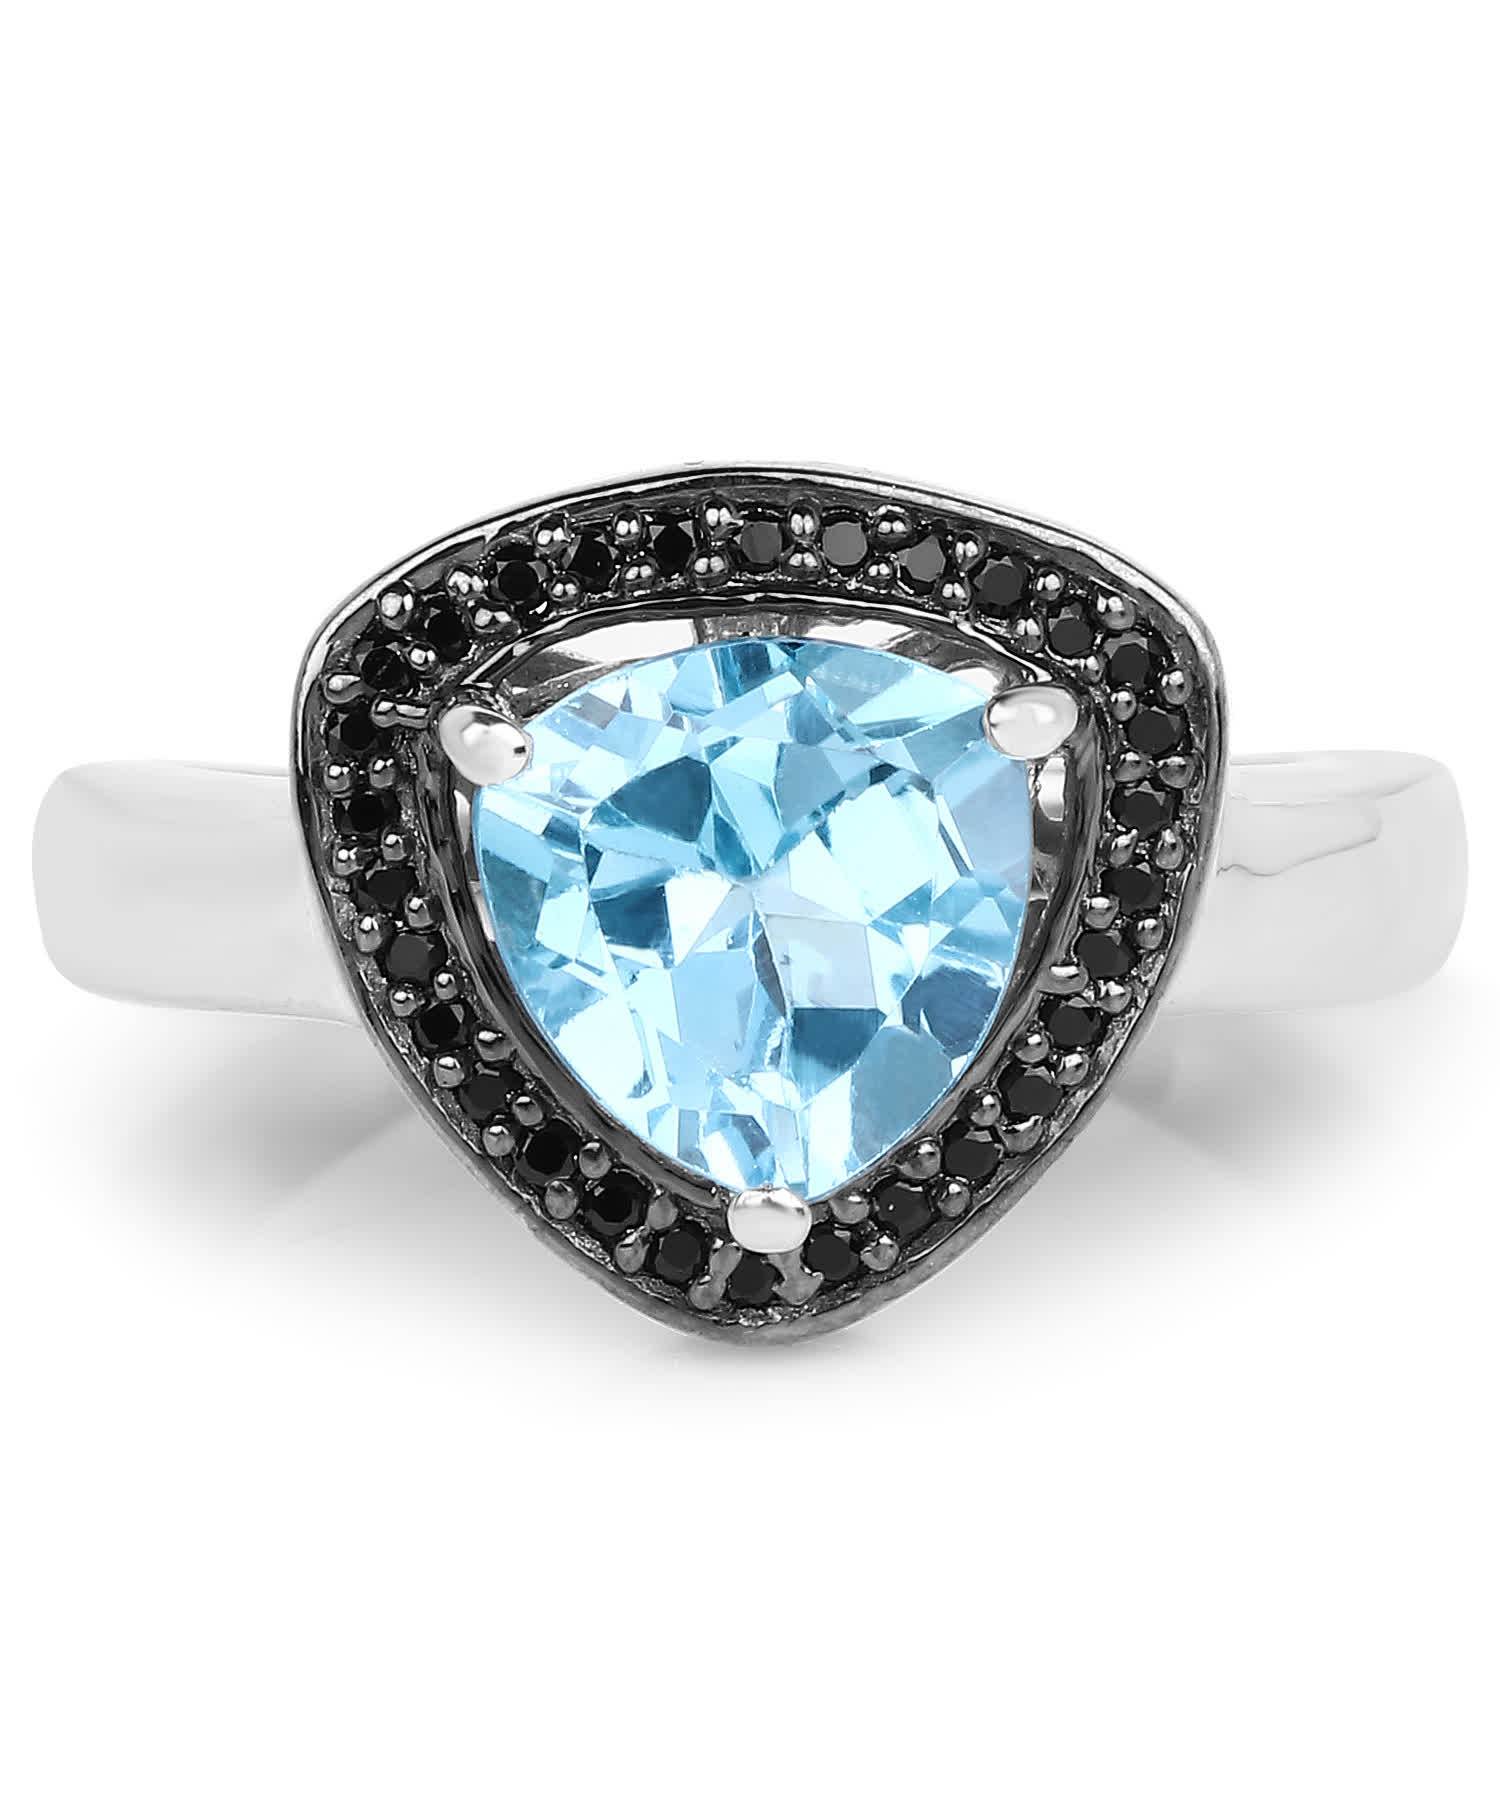 2.06ctw Natural Swiss Blue Topaz and Black Diamond Rhodium Plated 925 Sterling Silver Triangle Ring View 3